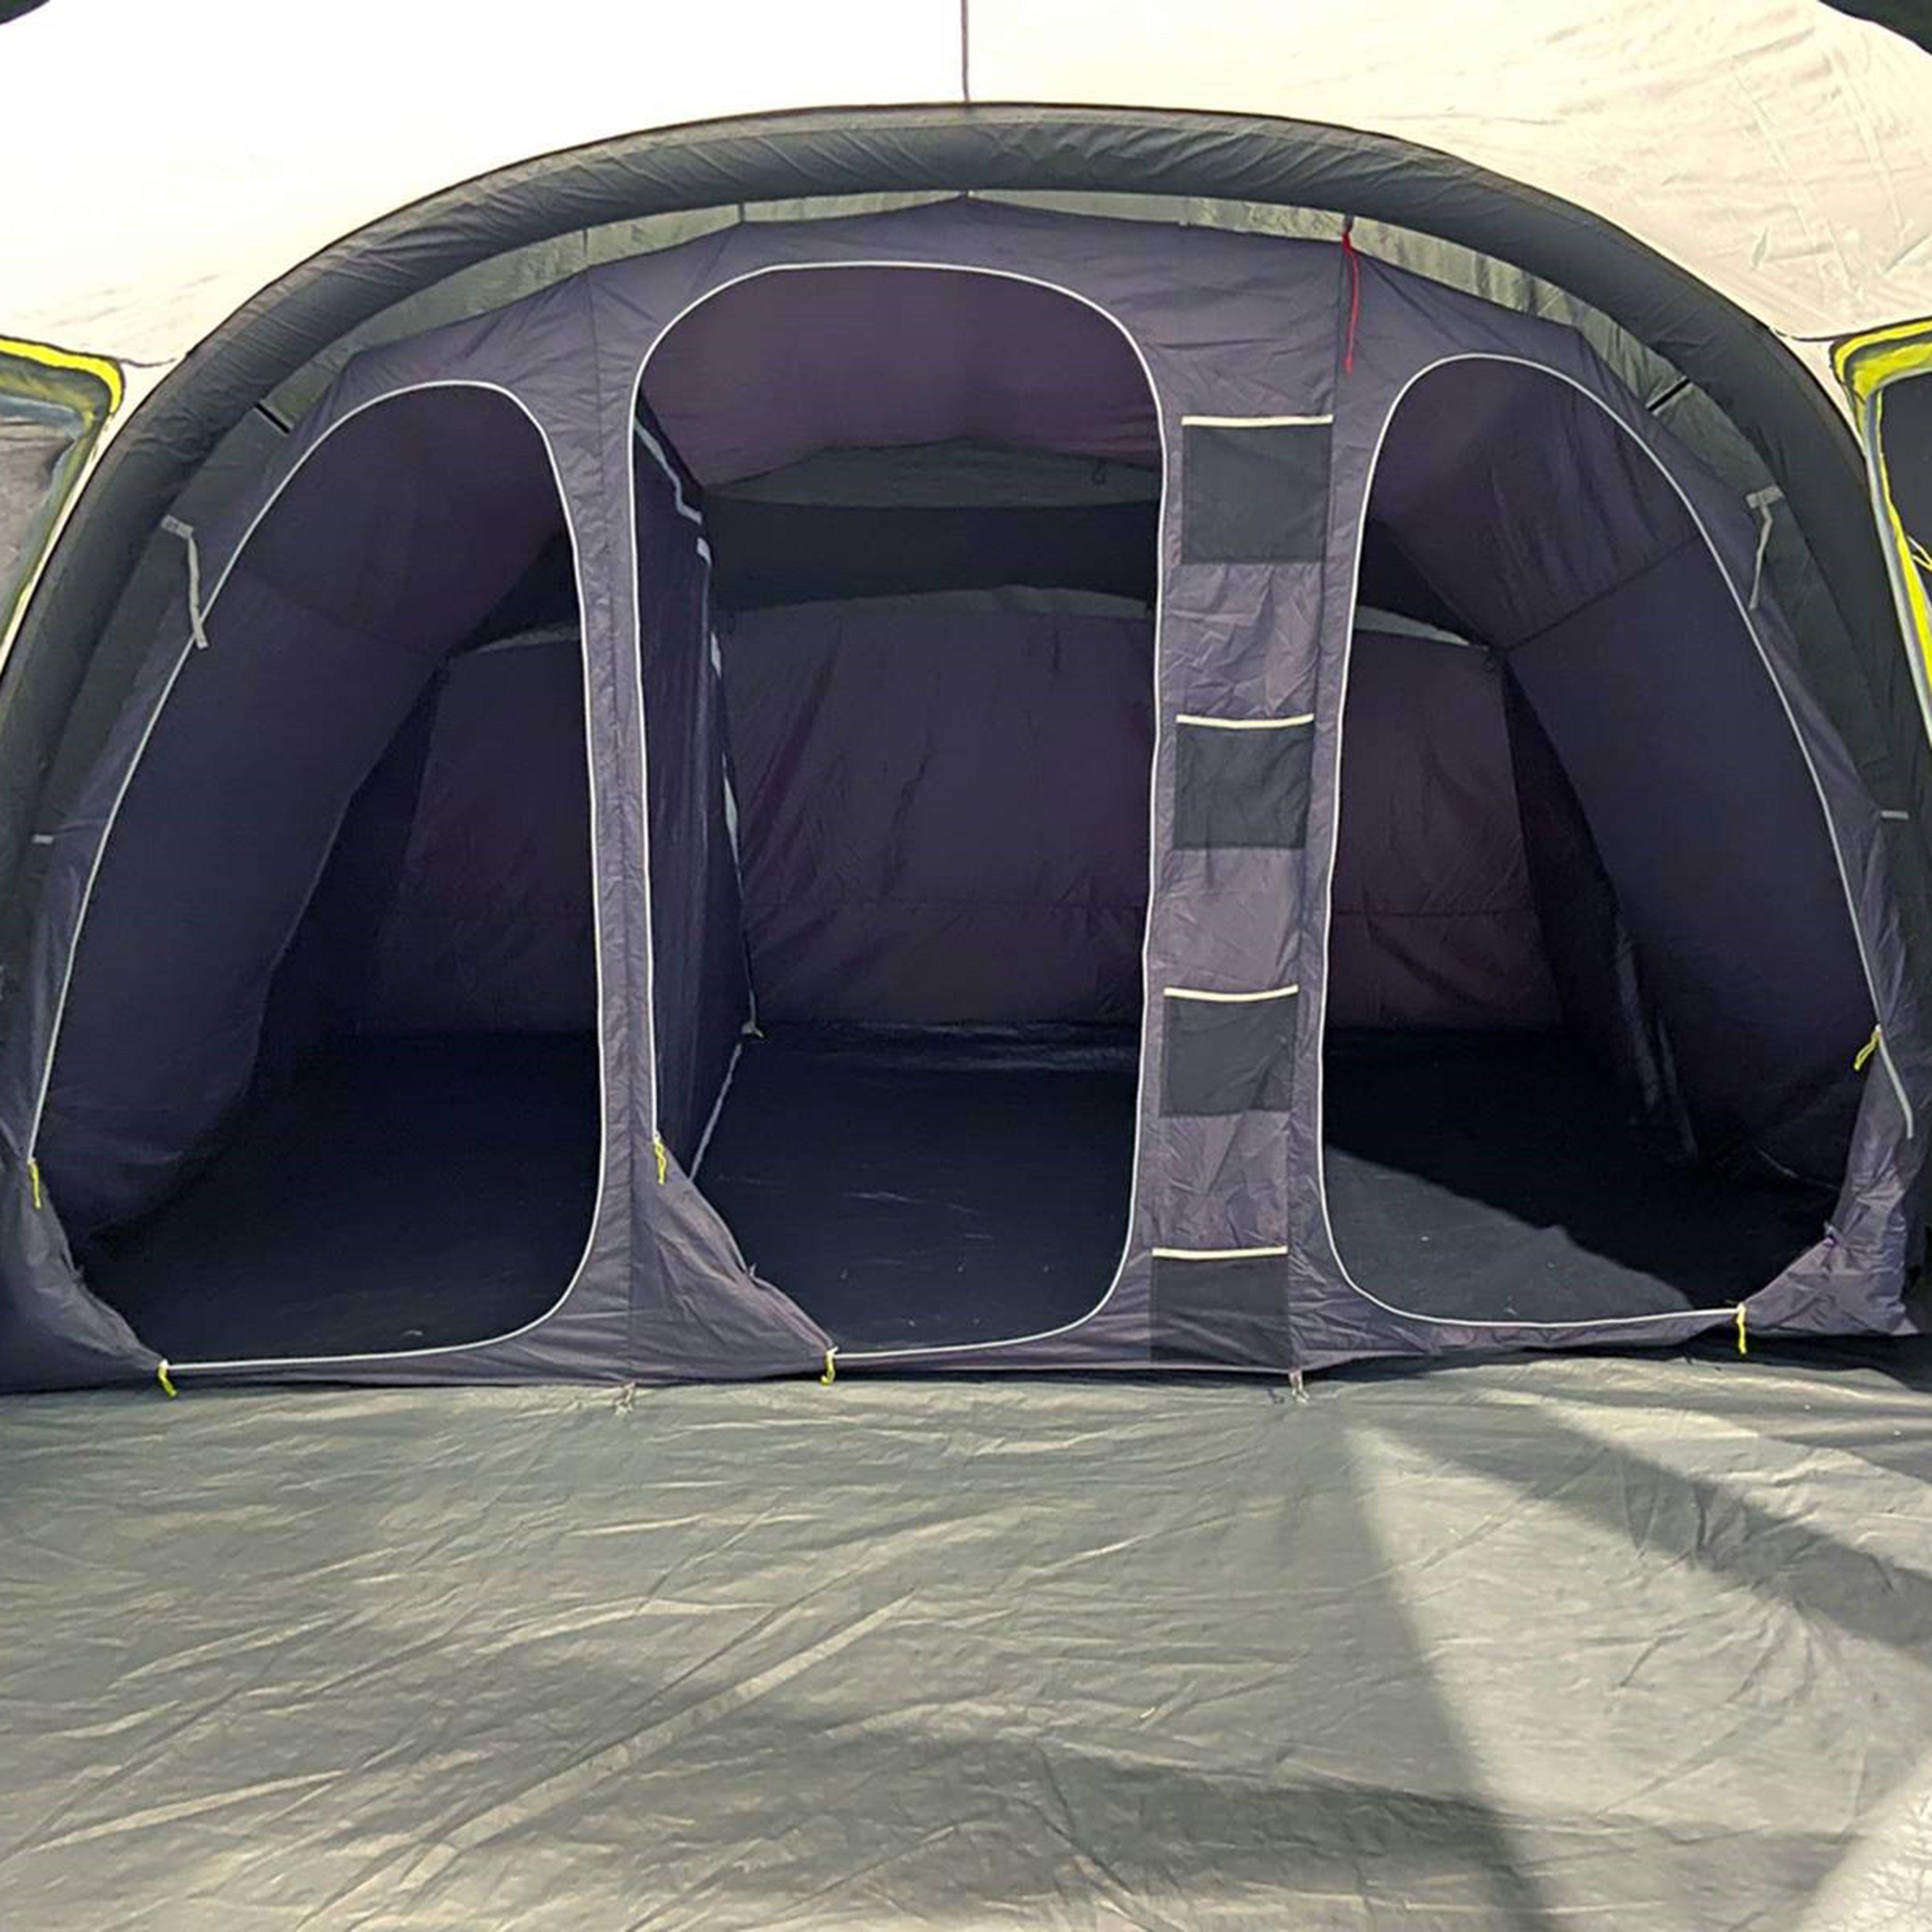 Outdoor Revolution Vacation 6.0 Inflatable Tent Review